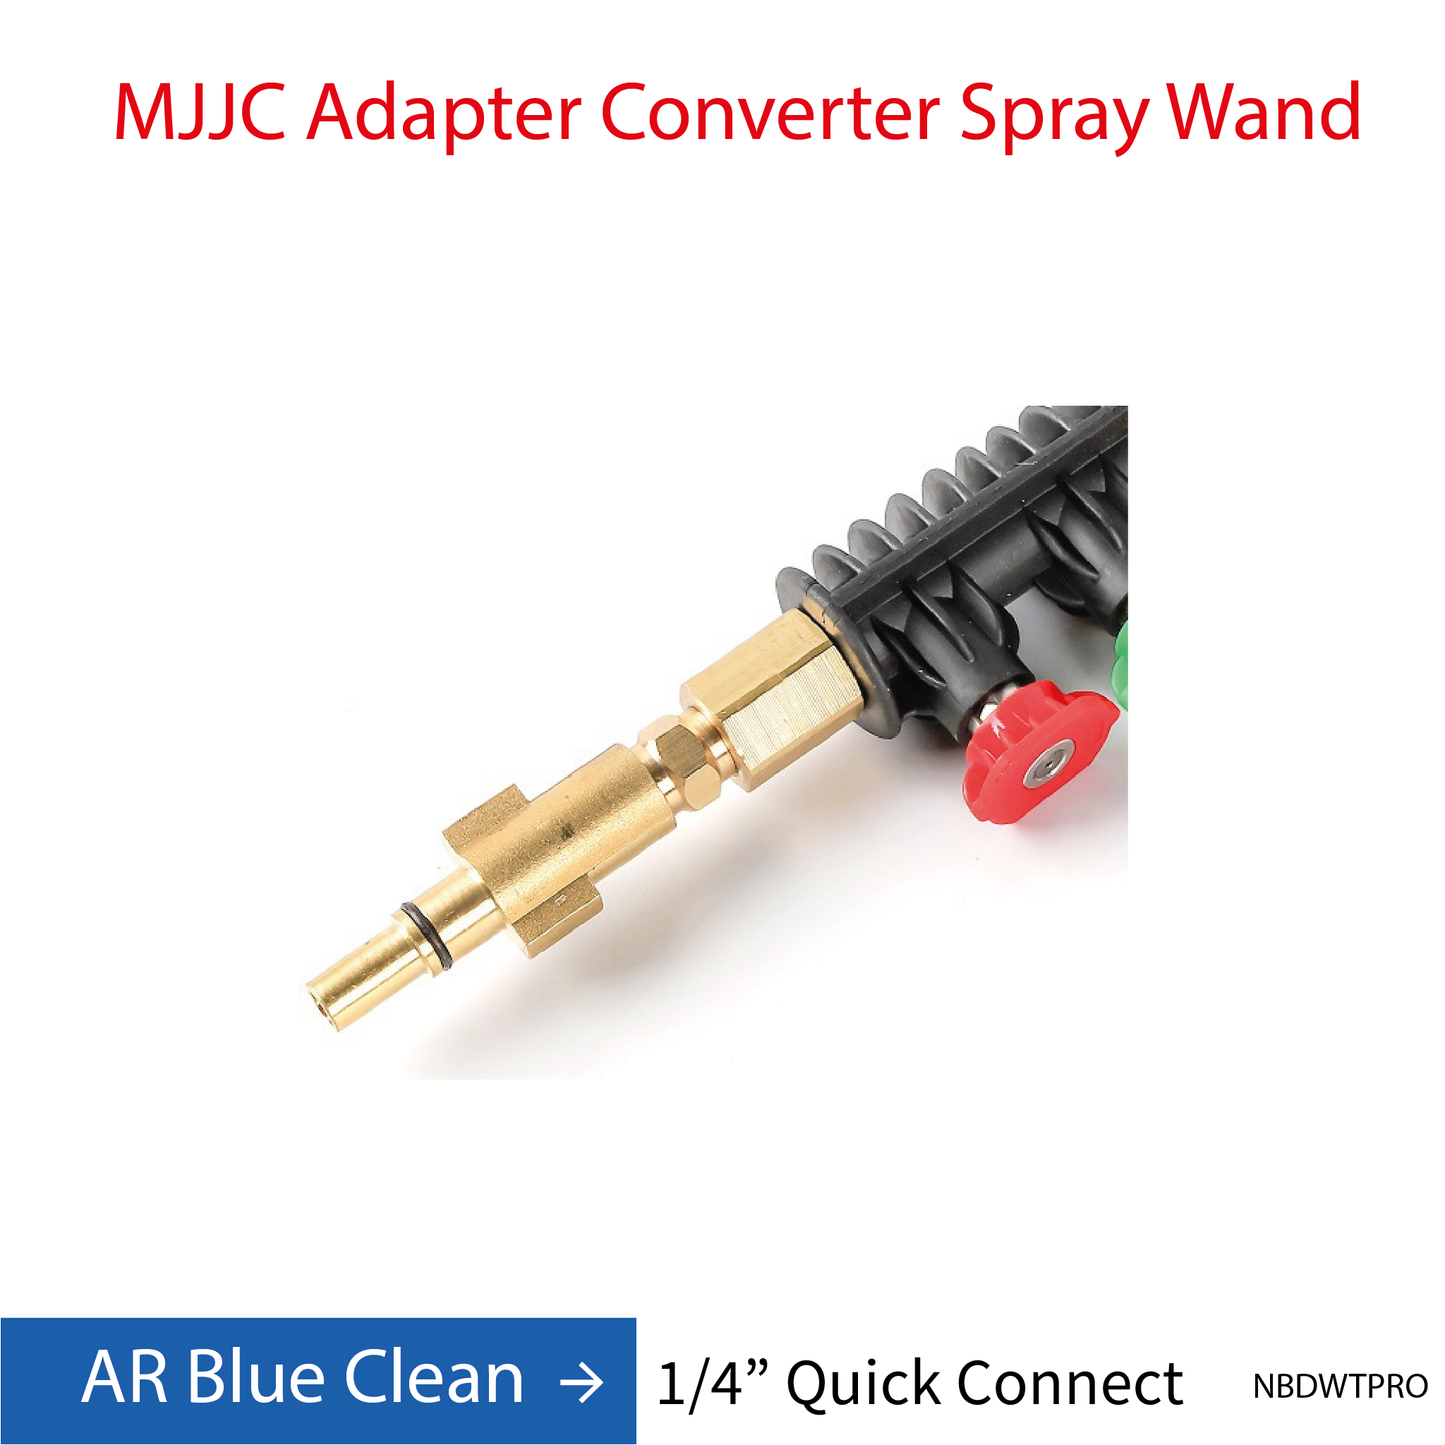 AR Blue Clean MJJC Adapter Conversion Converter pressure washer Spray Wand with 5 spray tips